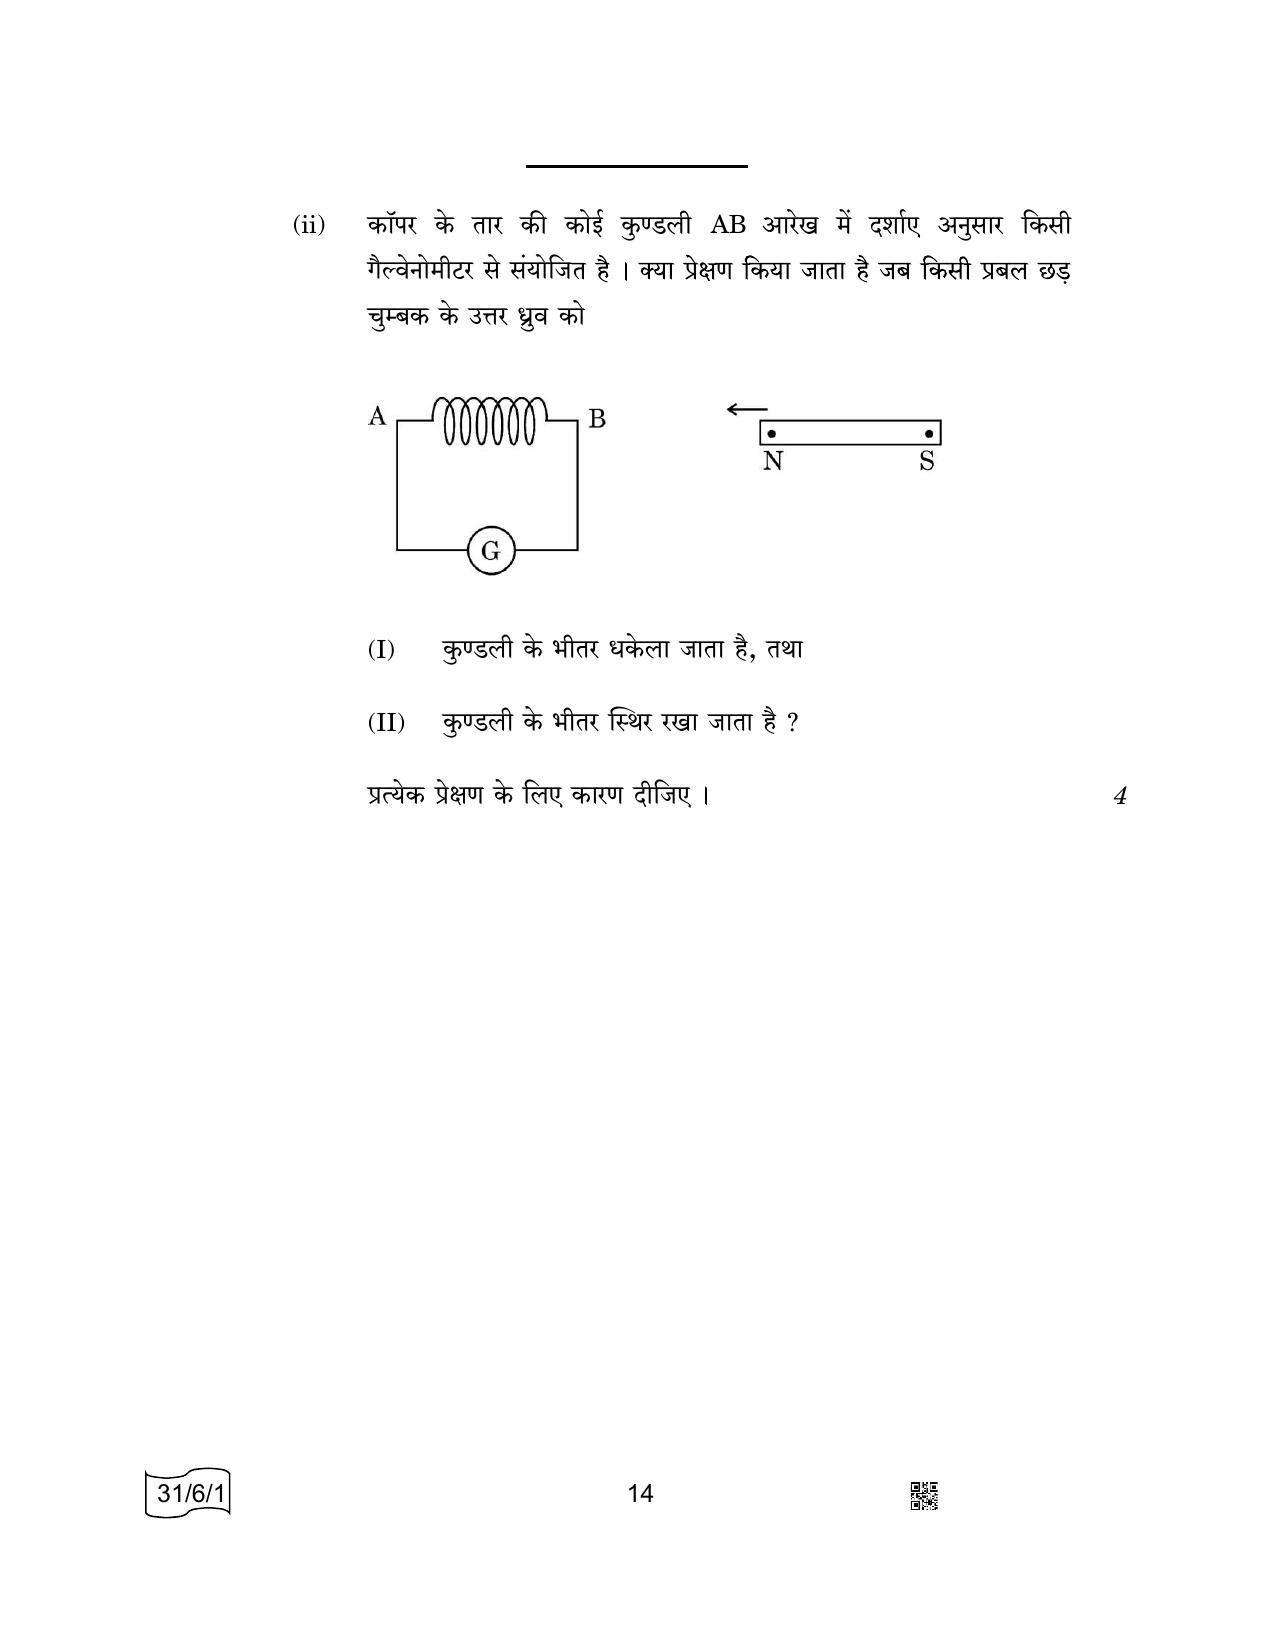 CBSE Class 10 31-6-1 SCIENCE 2022 Compartment Question Paper - Page 14